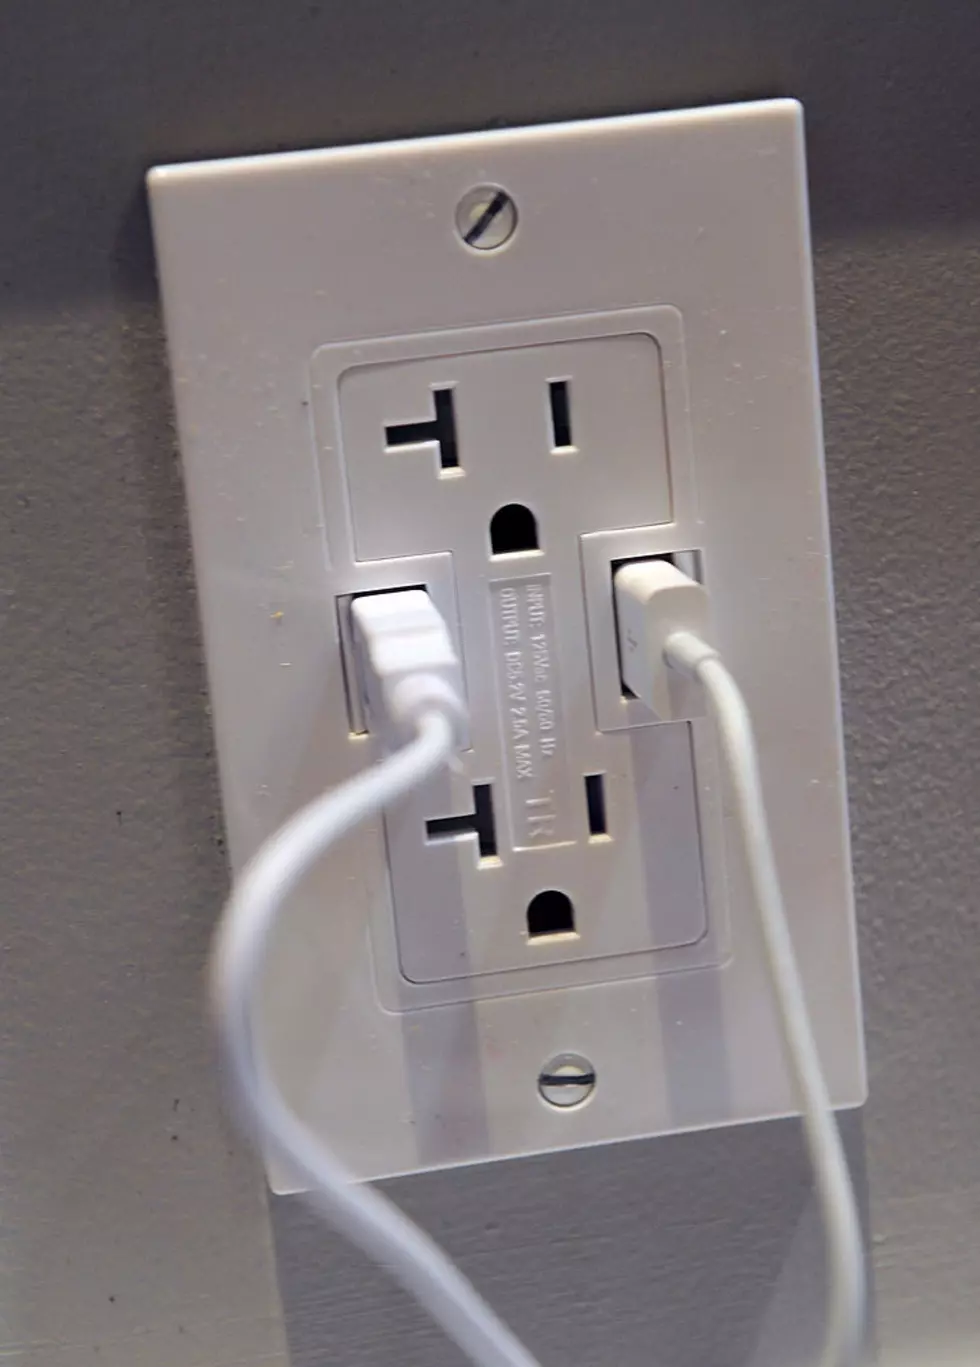 Thousands Of USB Chargers Recalled Due To Fire Hazard